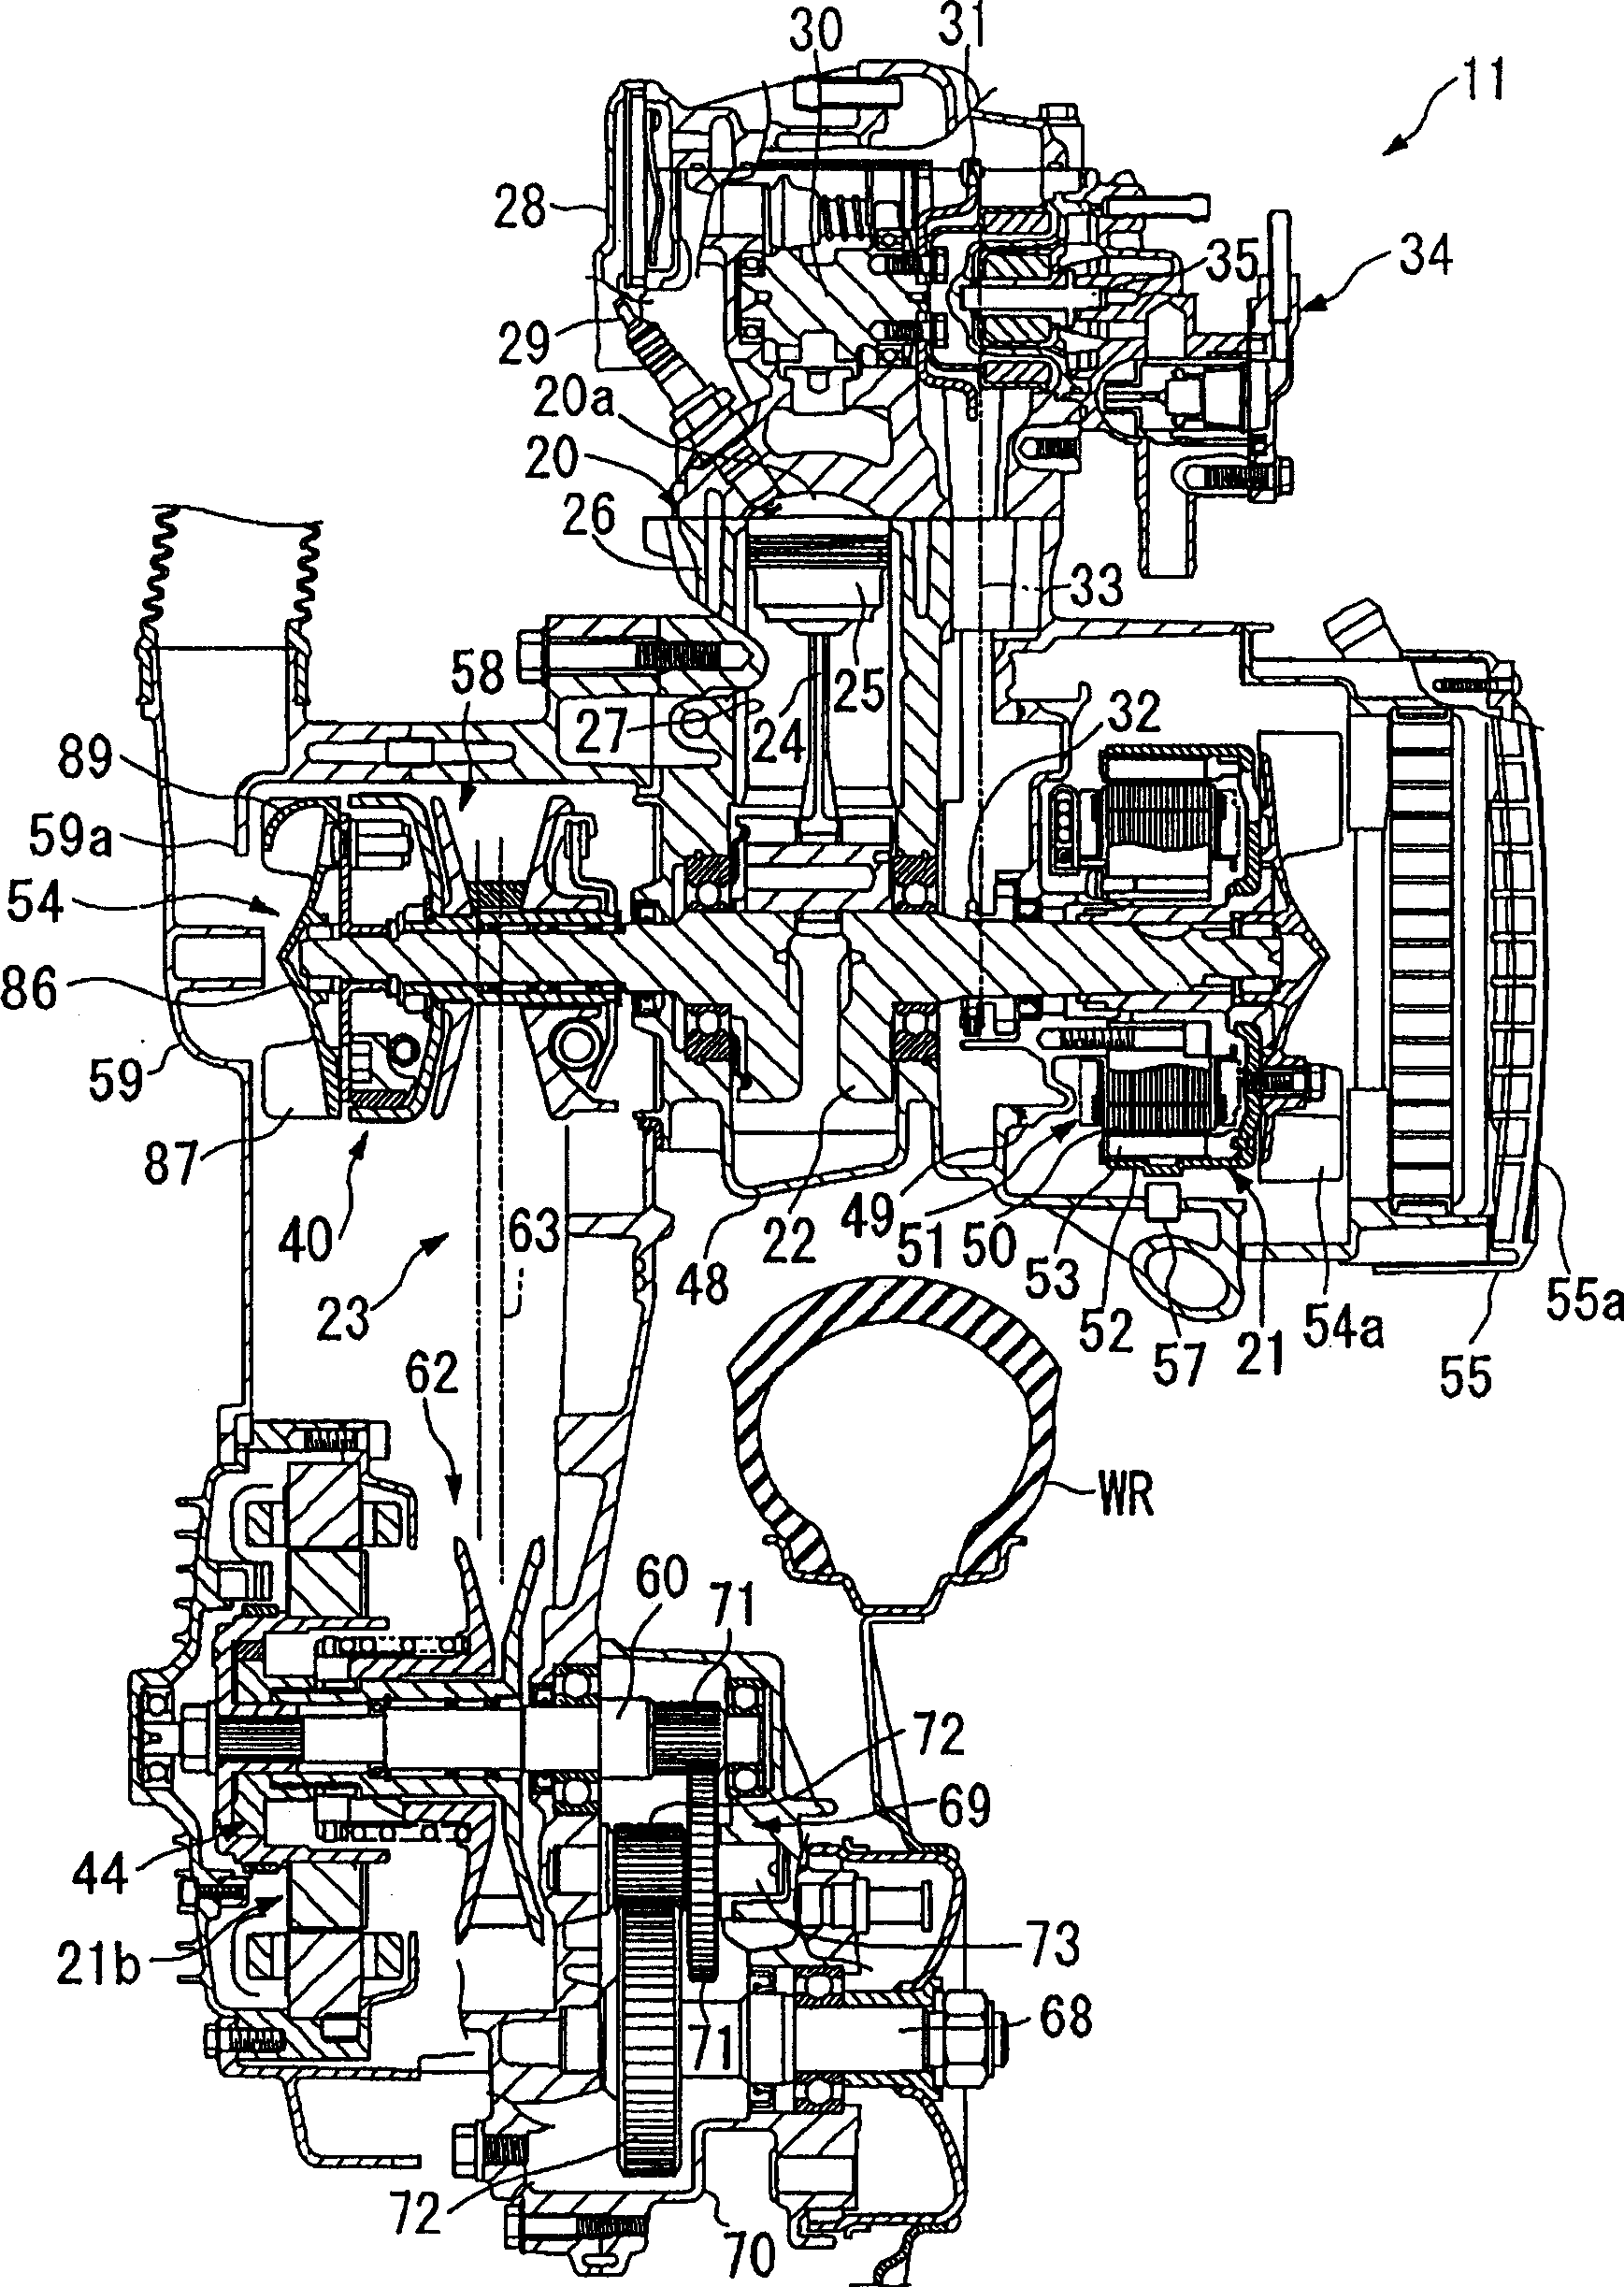 Power unit cooling device